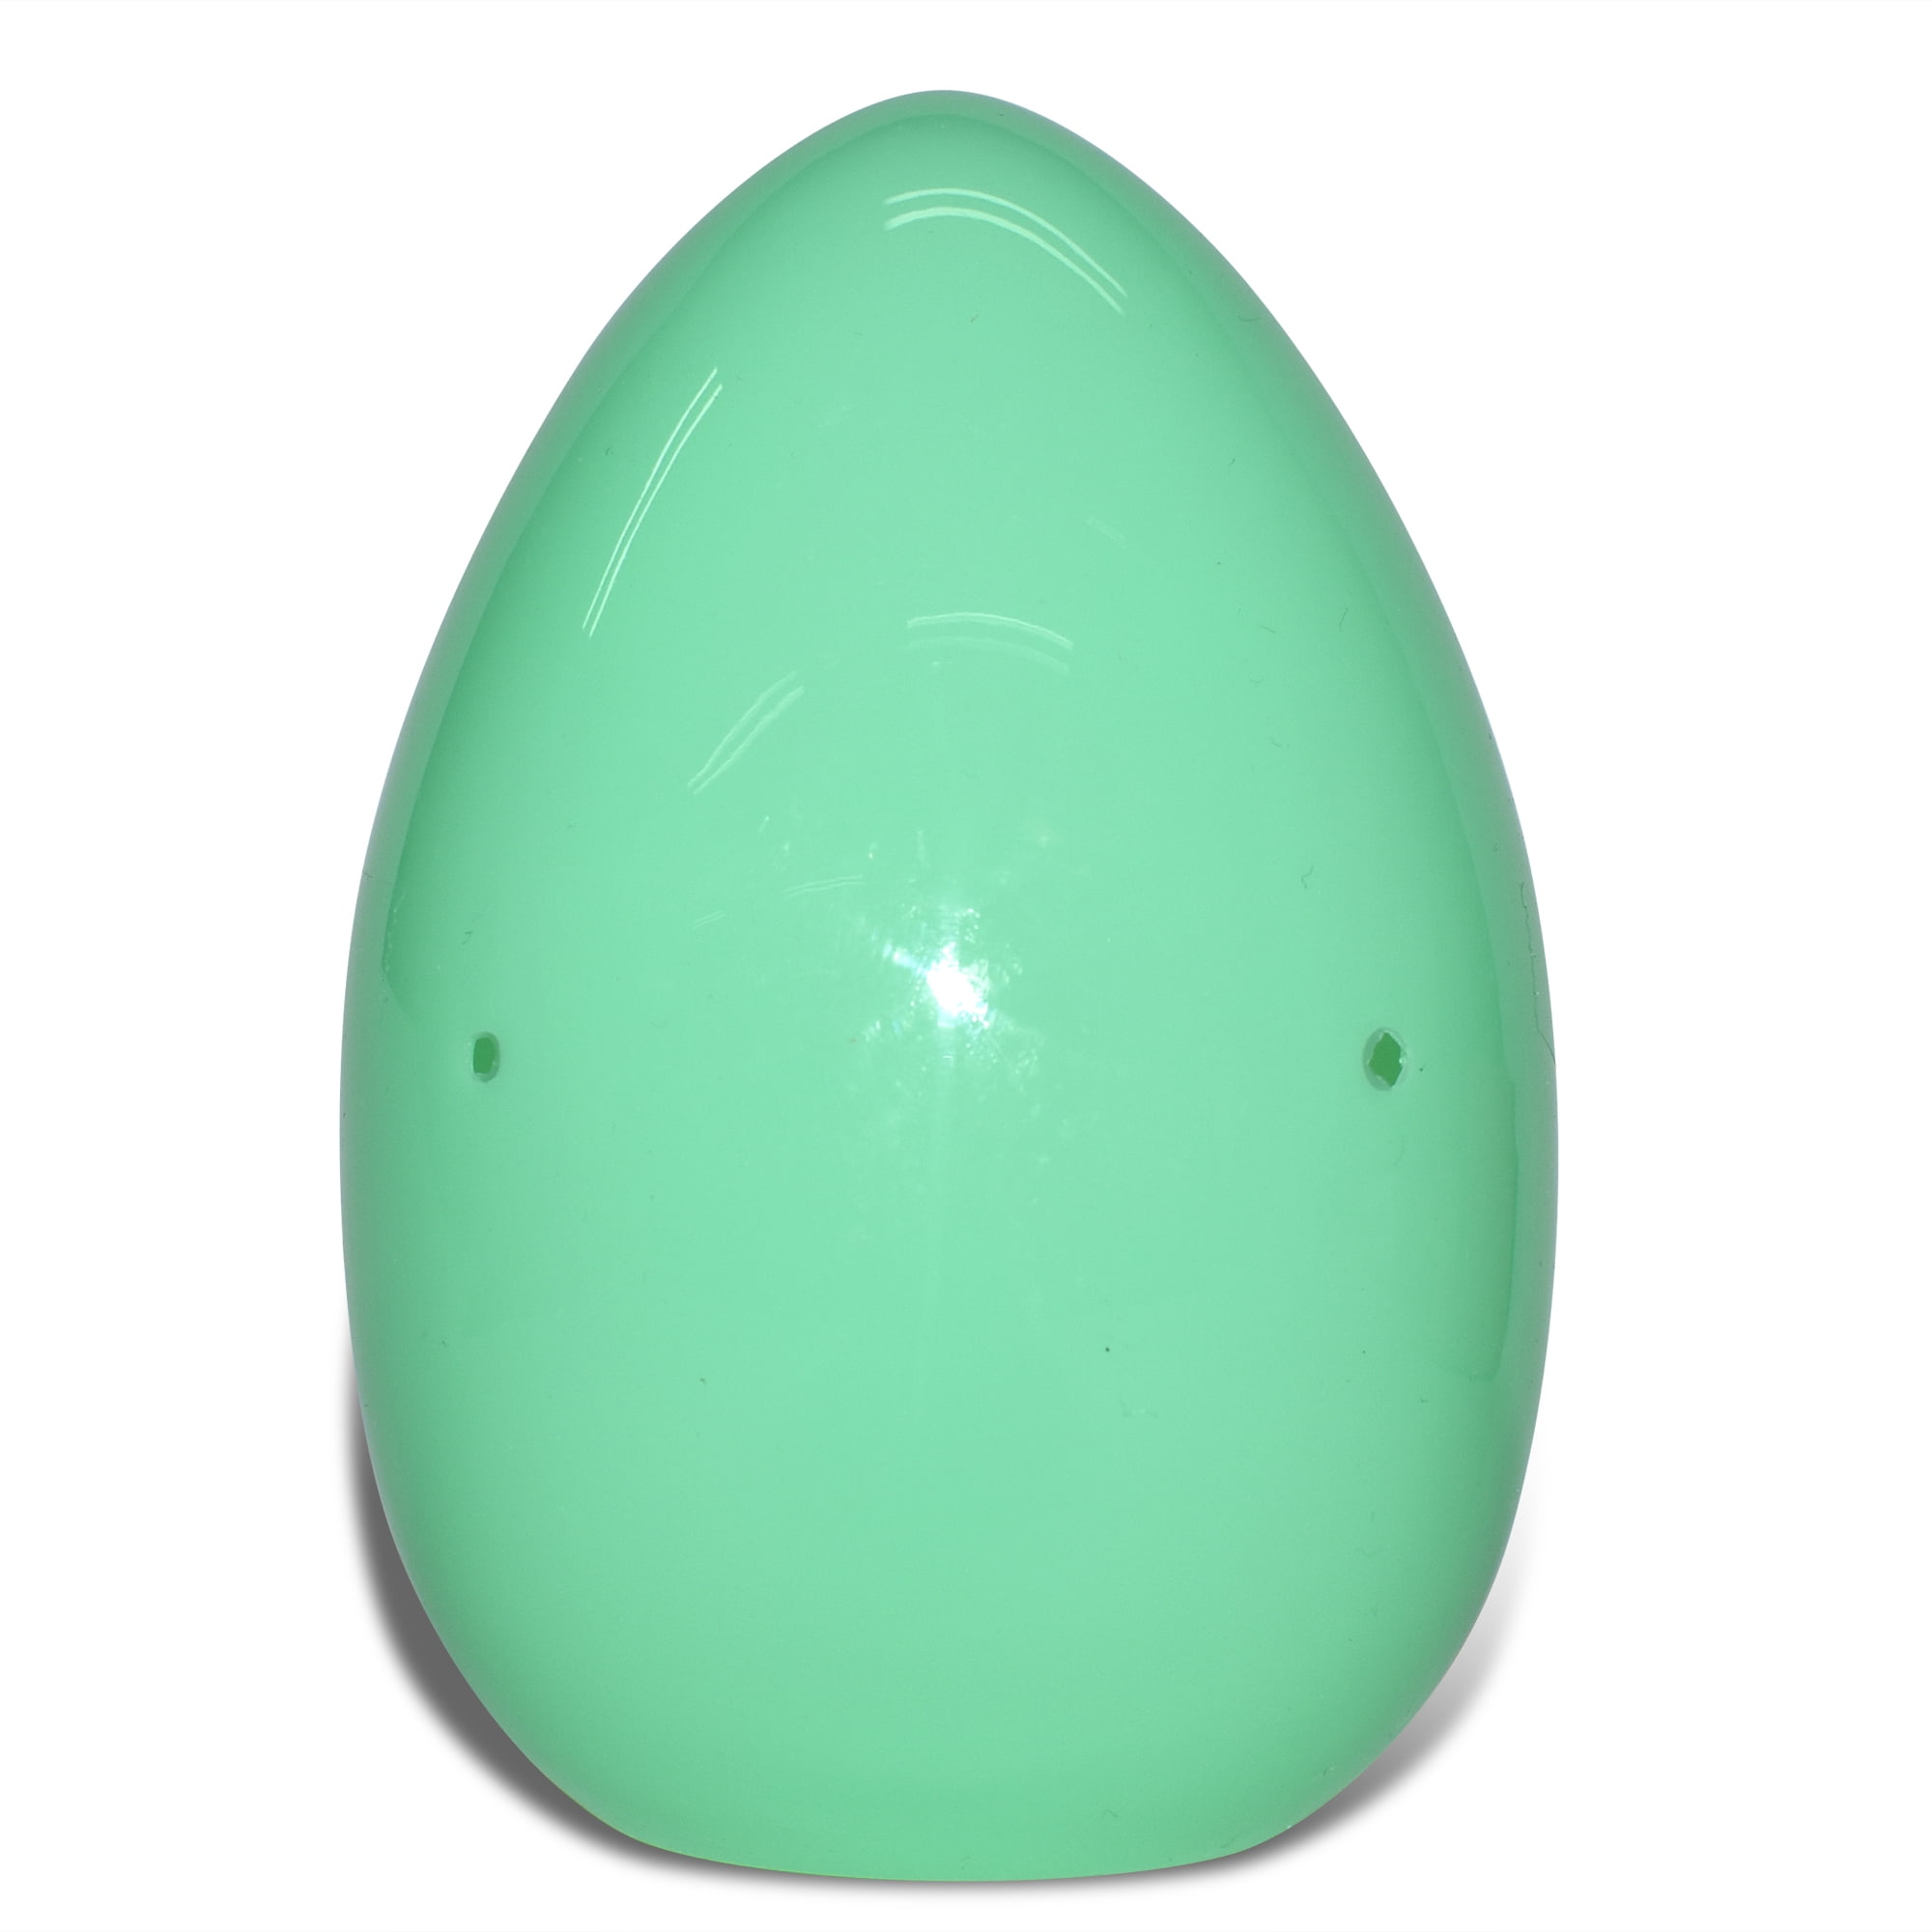 WAY TO CELEBRATE! Way to Celebrate Easter Large Plastic Egg Container Green - 1 Piece/Pack